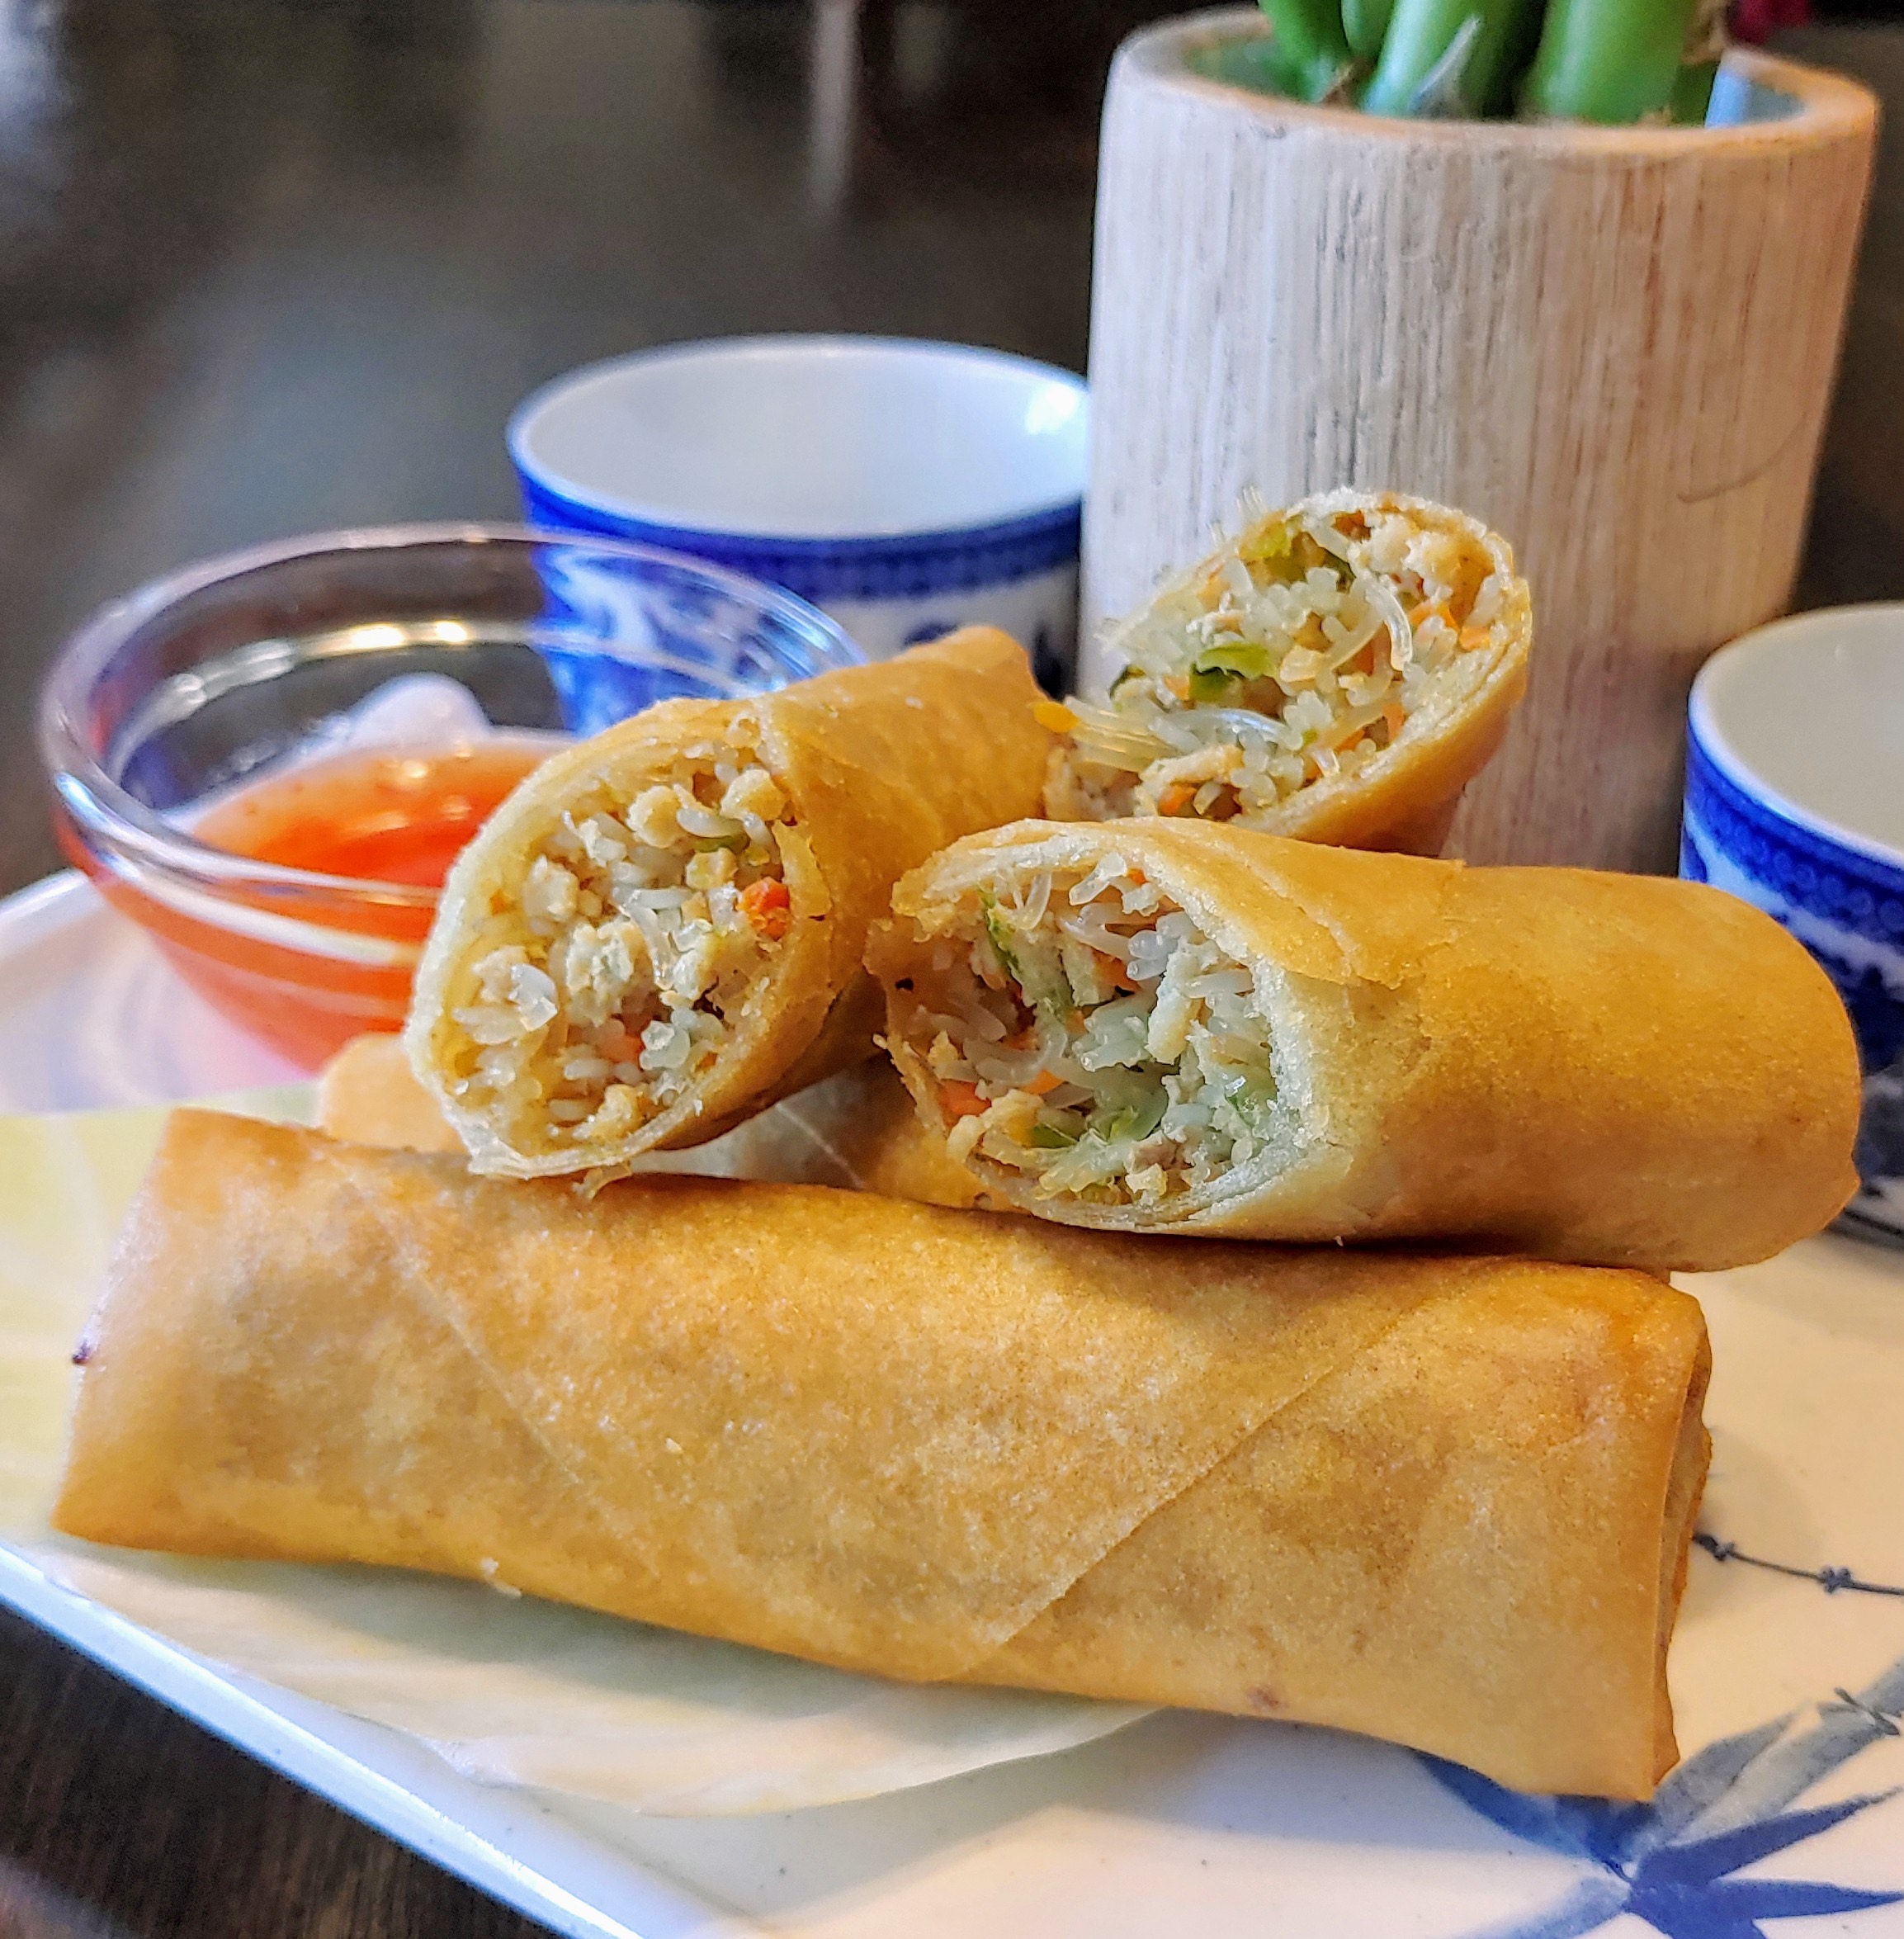 The Lumpia Queen is opening their first brick-and-mortar restaurant in W. Social Tap & Table this summer.